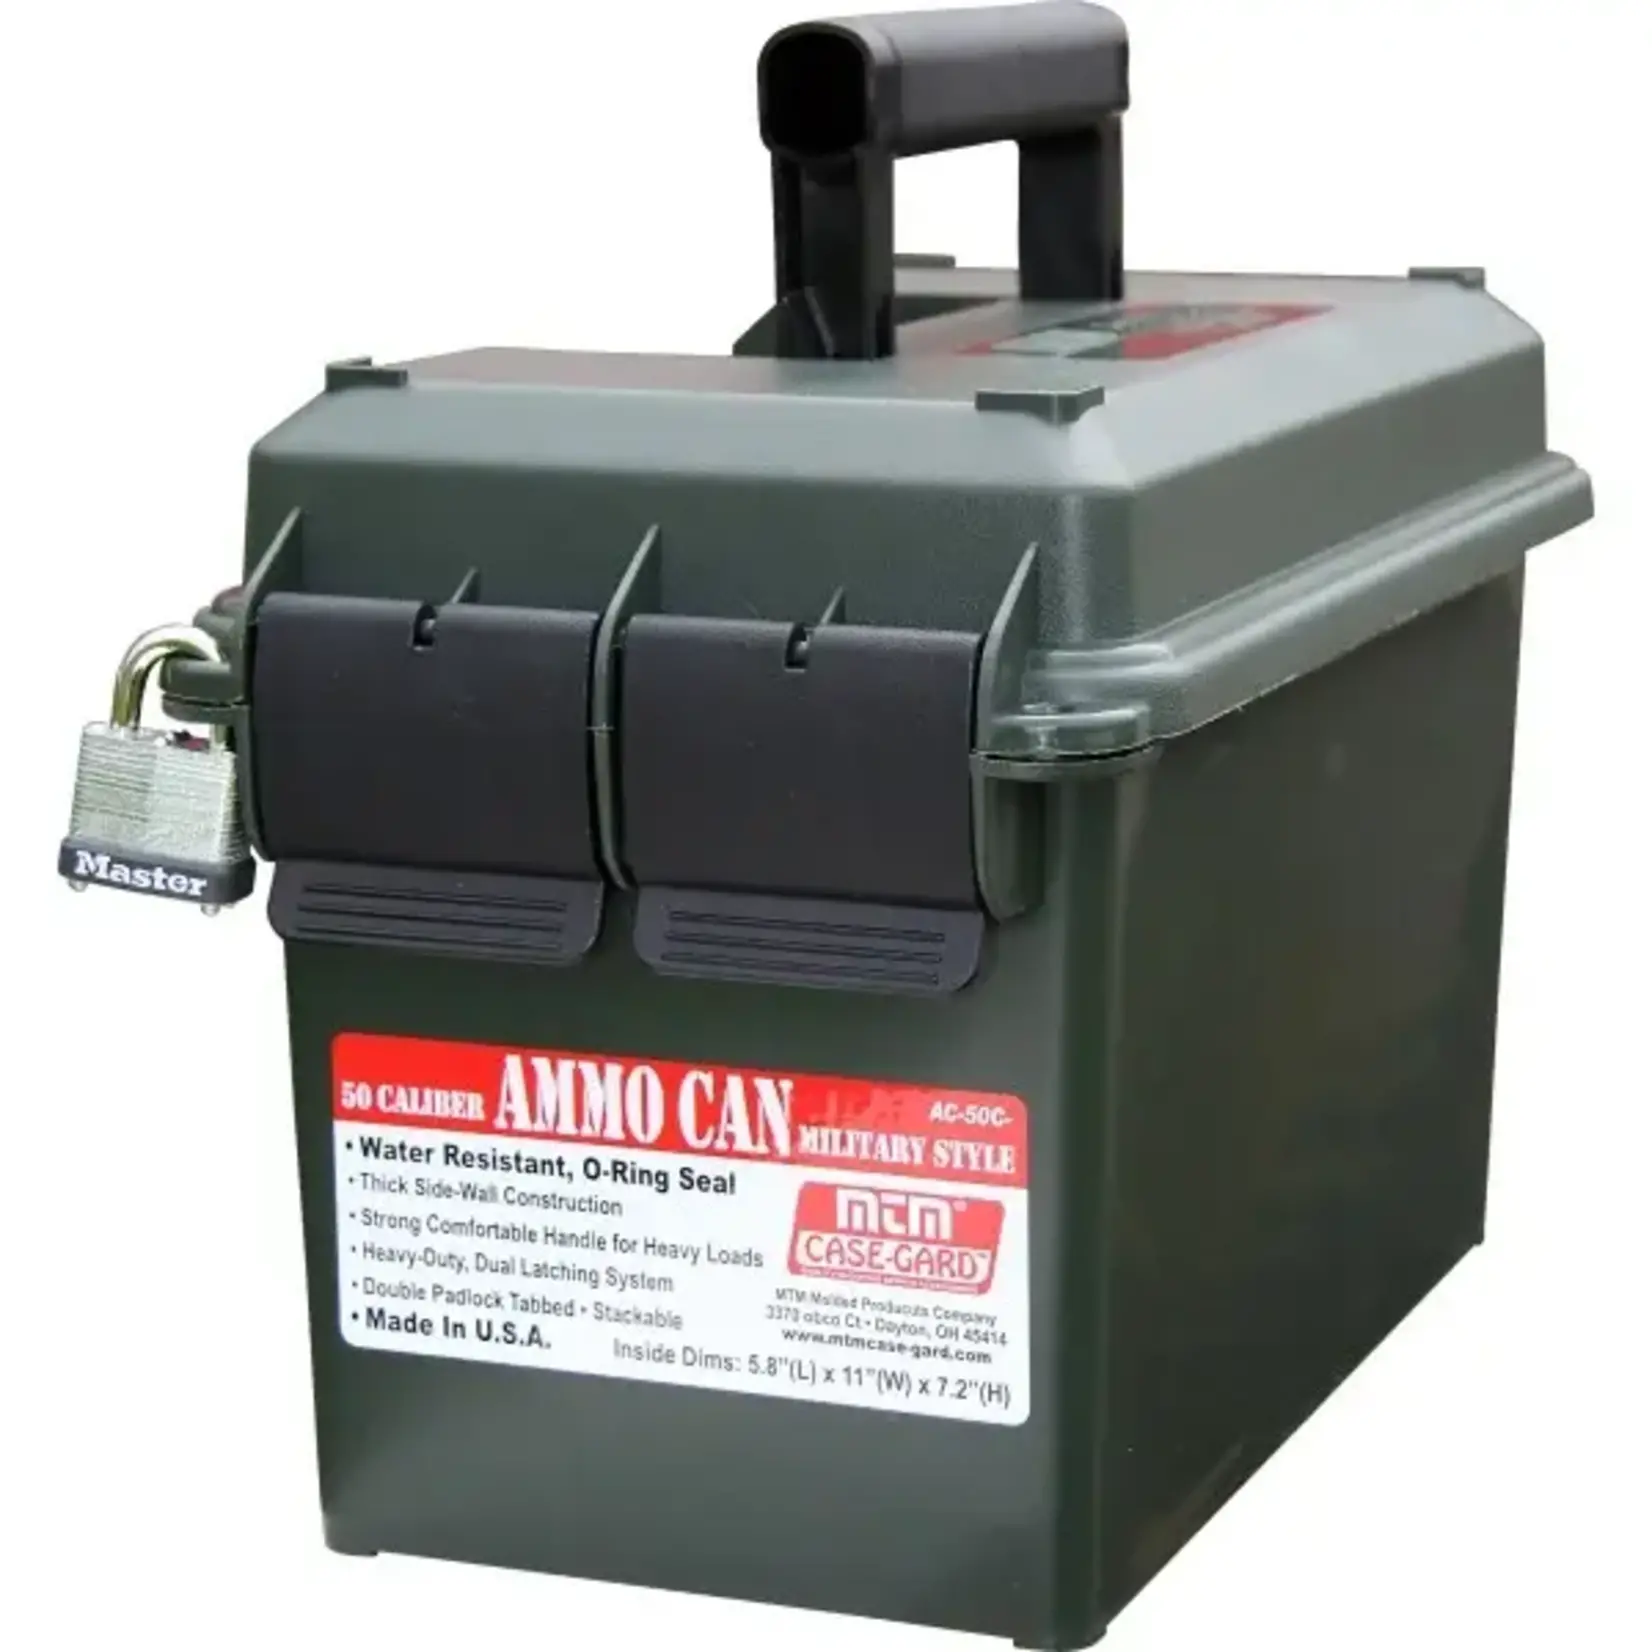 MTM MTM 50 Cal Ammo Can Forest Green